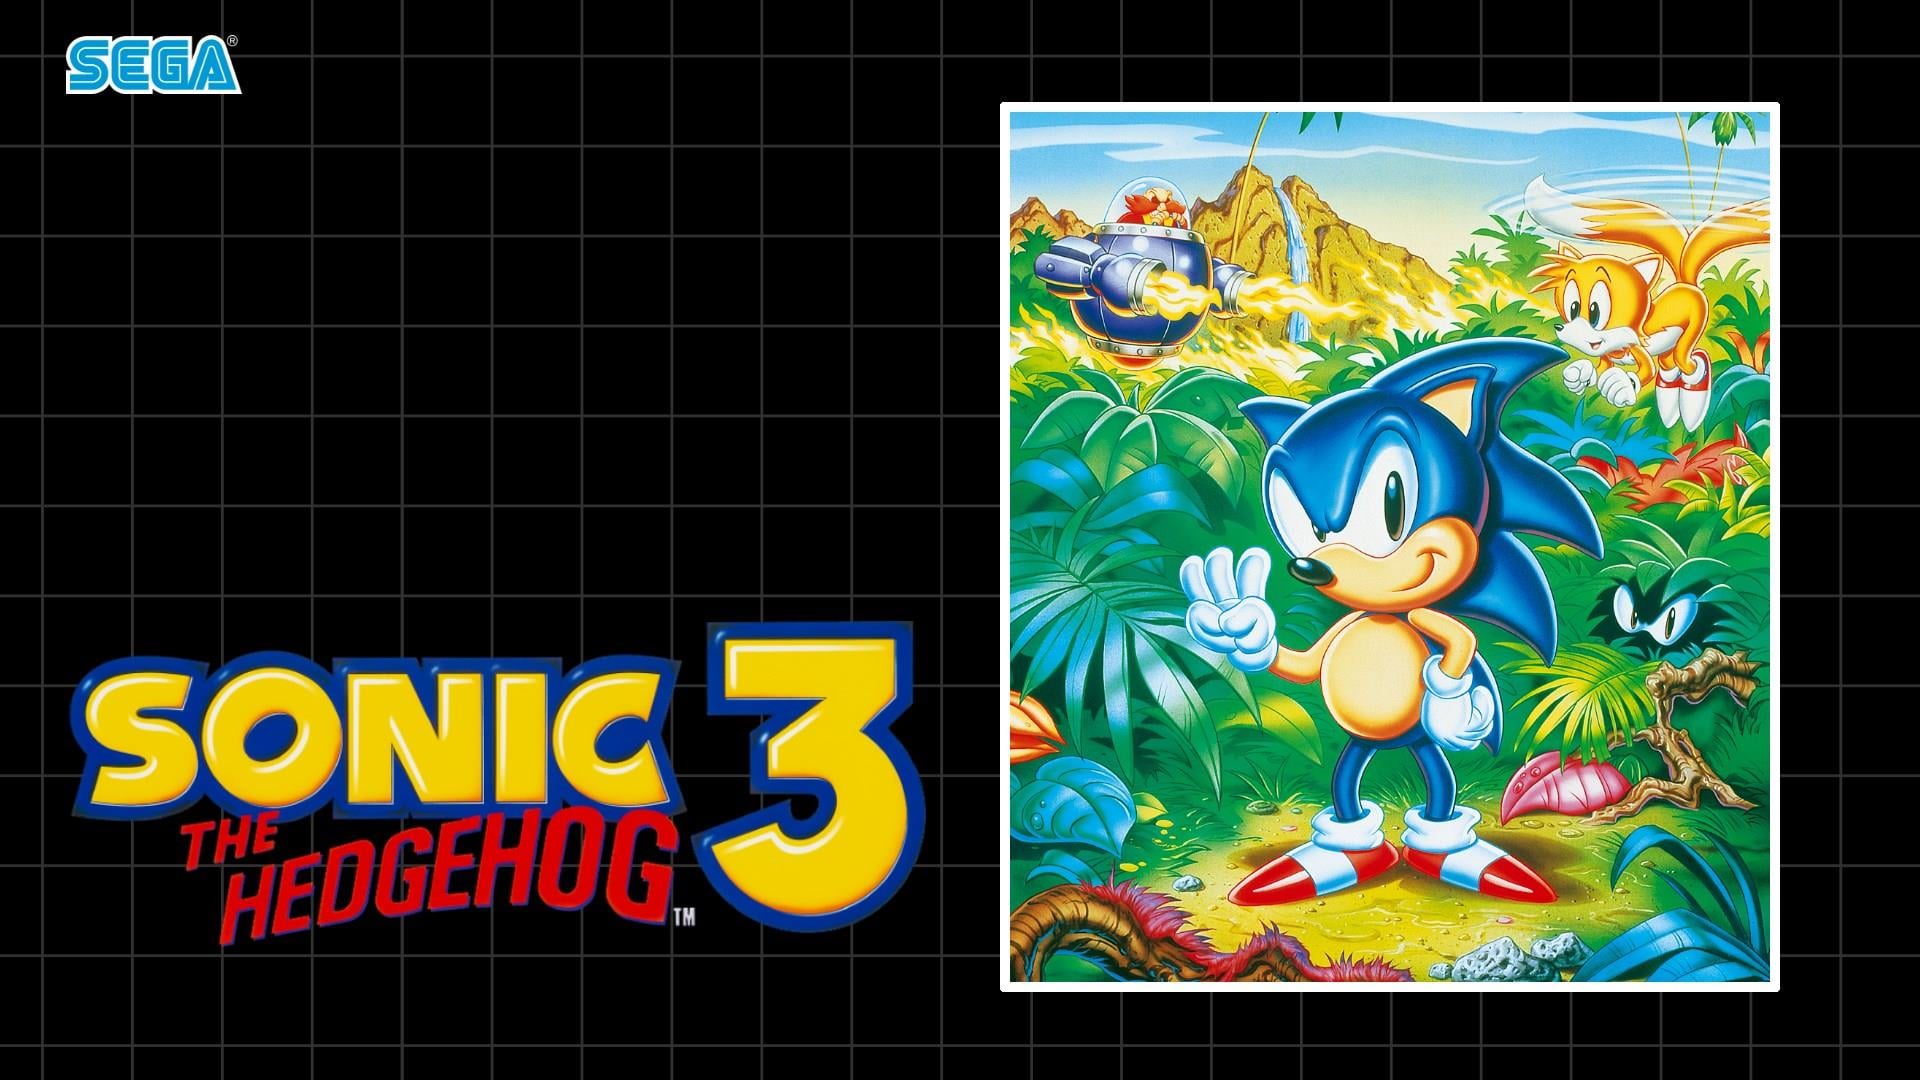 Sonic The Hedgehog 3 News and Videos